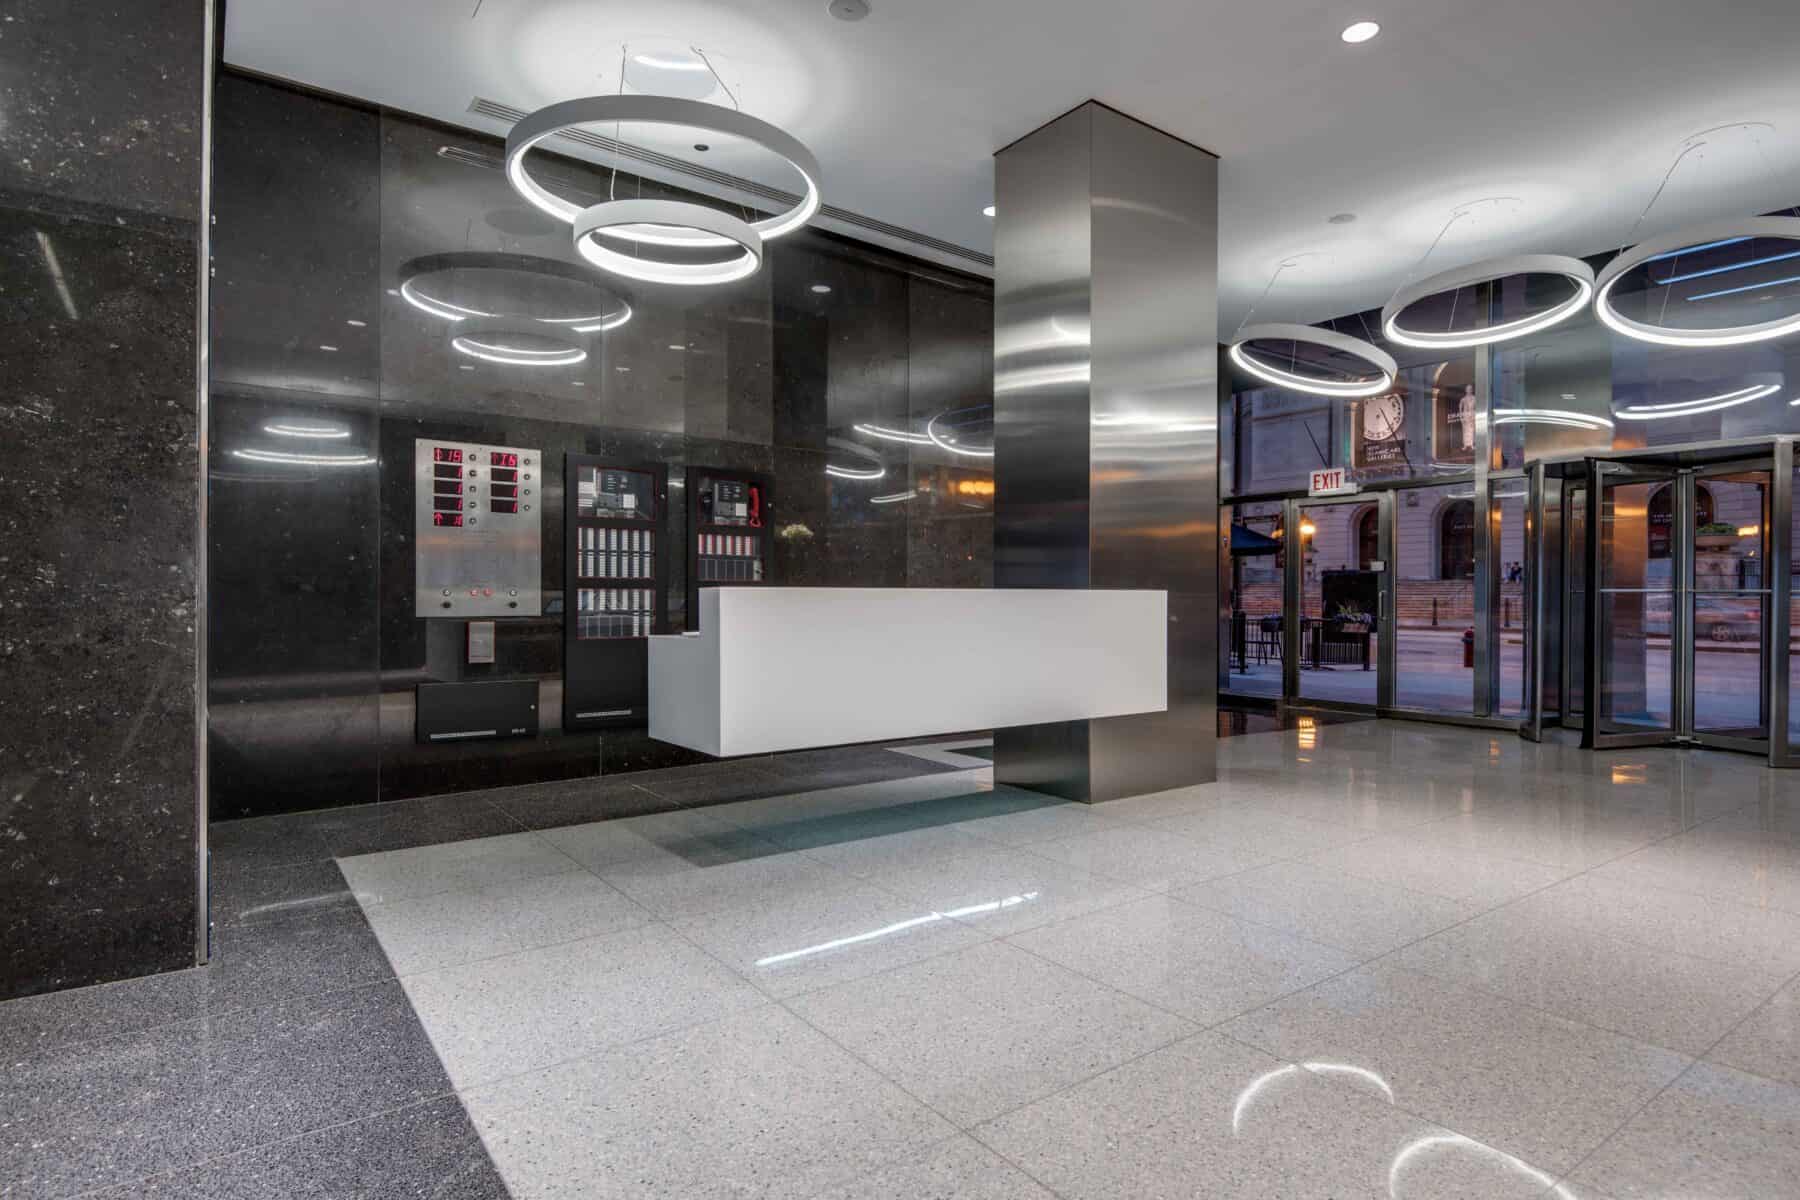 Michigan Avenue Lobby Remodel with White Floating Reception Desk and Suspended Circular Lights by Commercial Builder & General Contractor Structural Enterprises